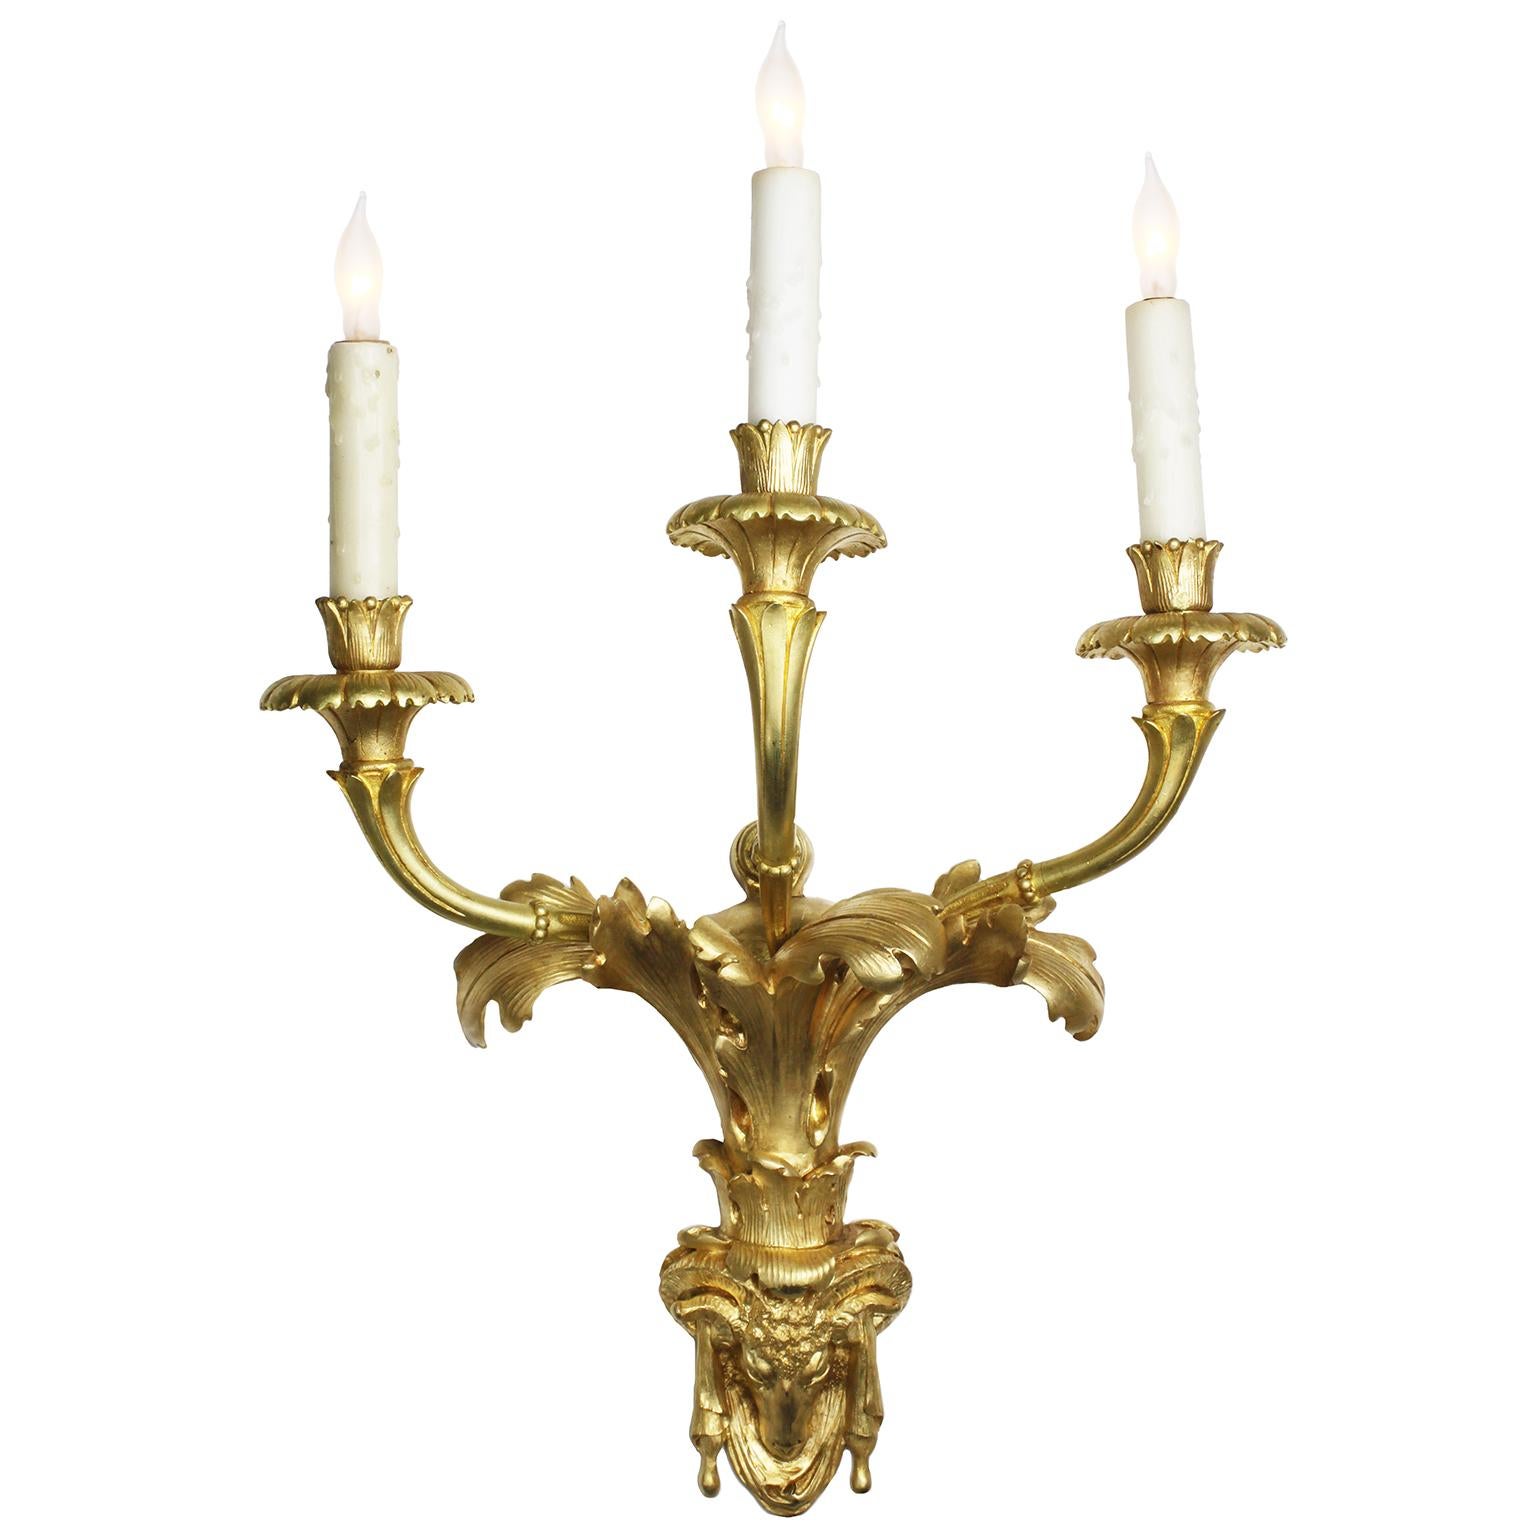 A Fine Pair of French 19th century Régence (Regency) style three-light gilt-bronze wall lights. The scrolled three light candle-lights, now electrified, above an acanthus leaf design ending with a draped ram-head finial. Circa: Paris,